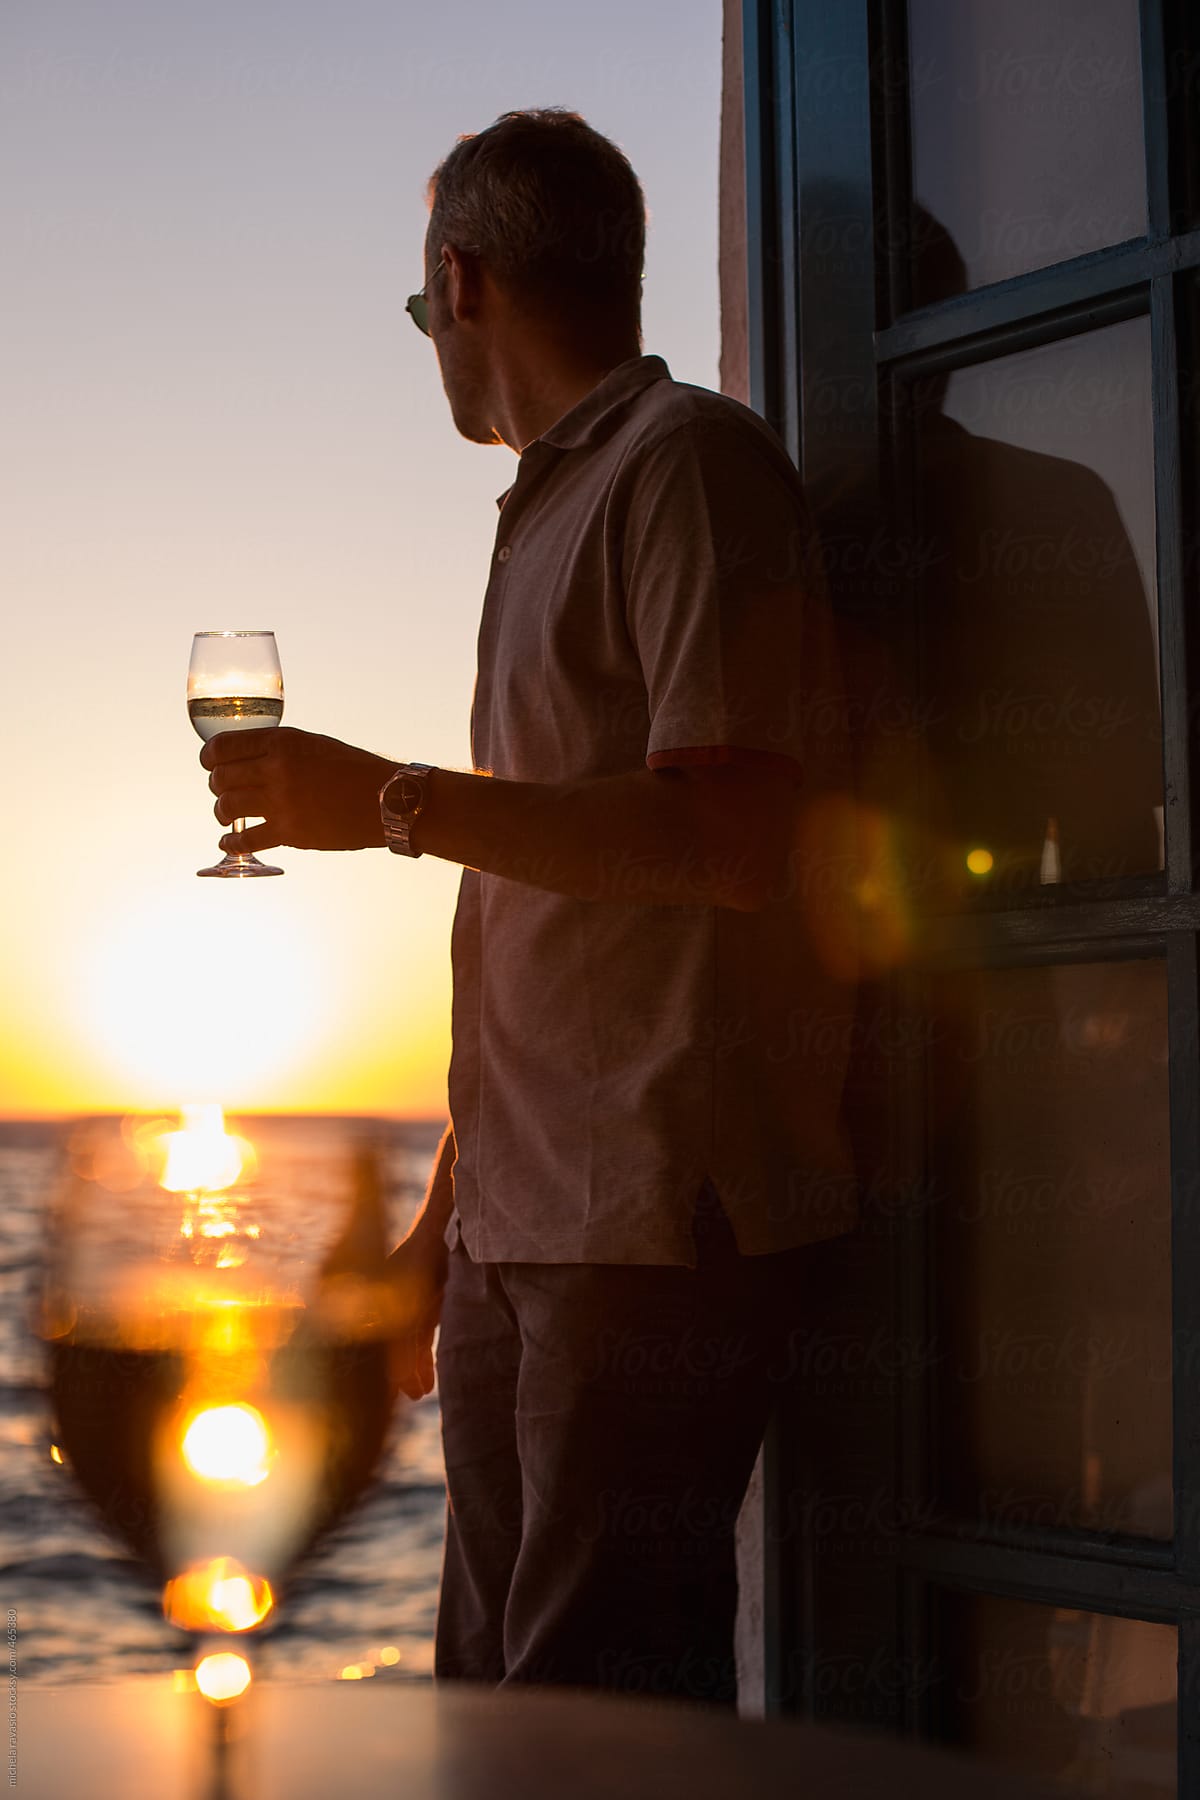 Man looking at the sunset with a glass of white wine in hand